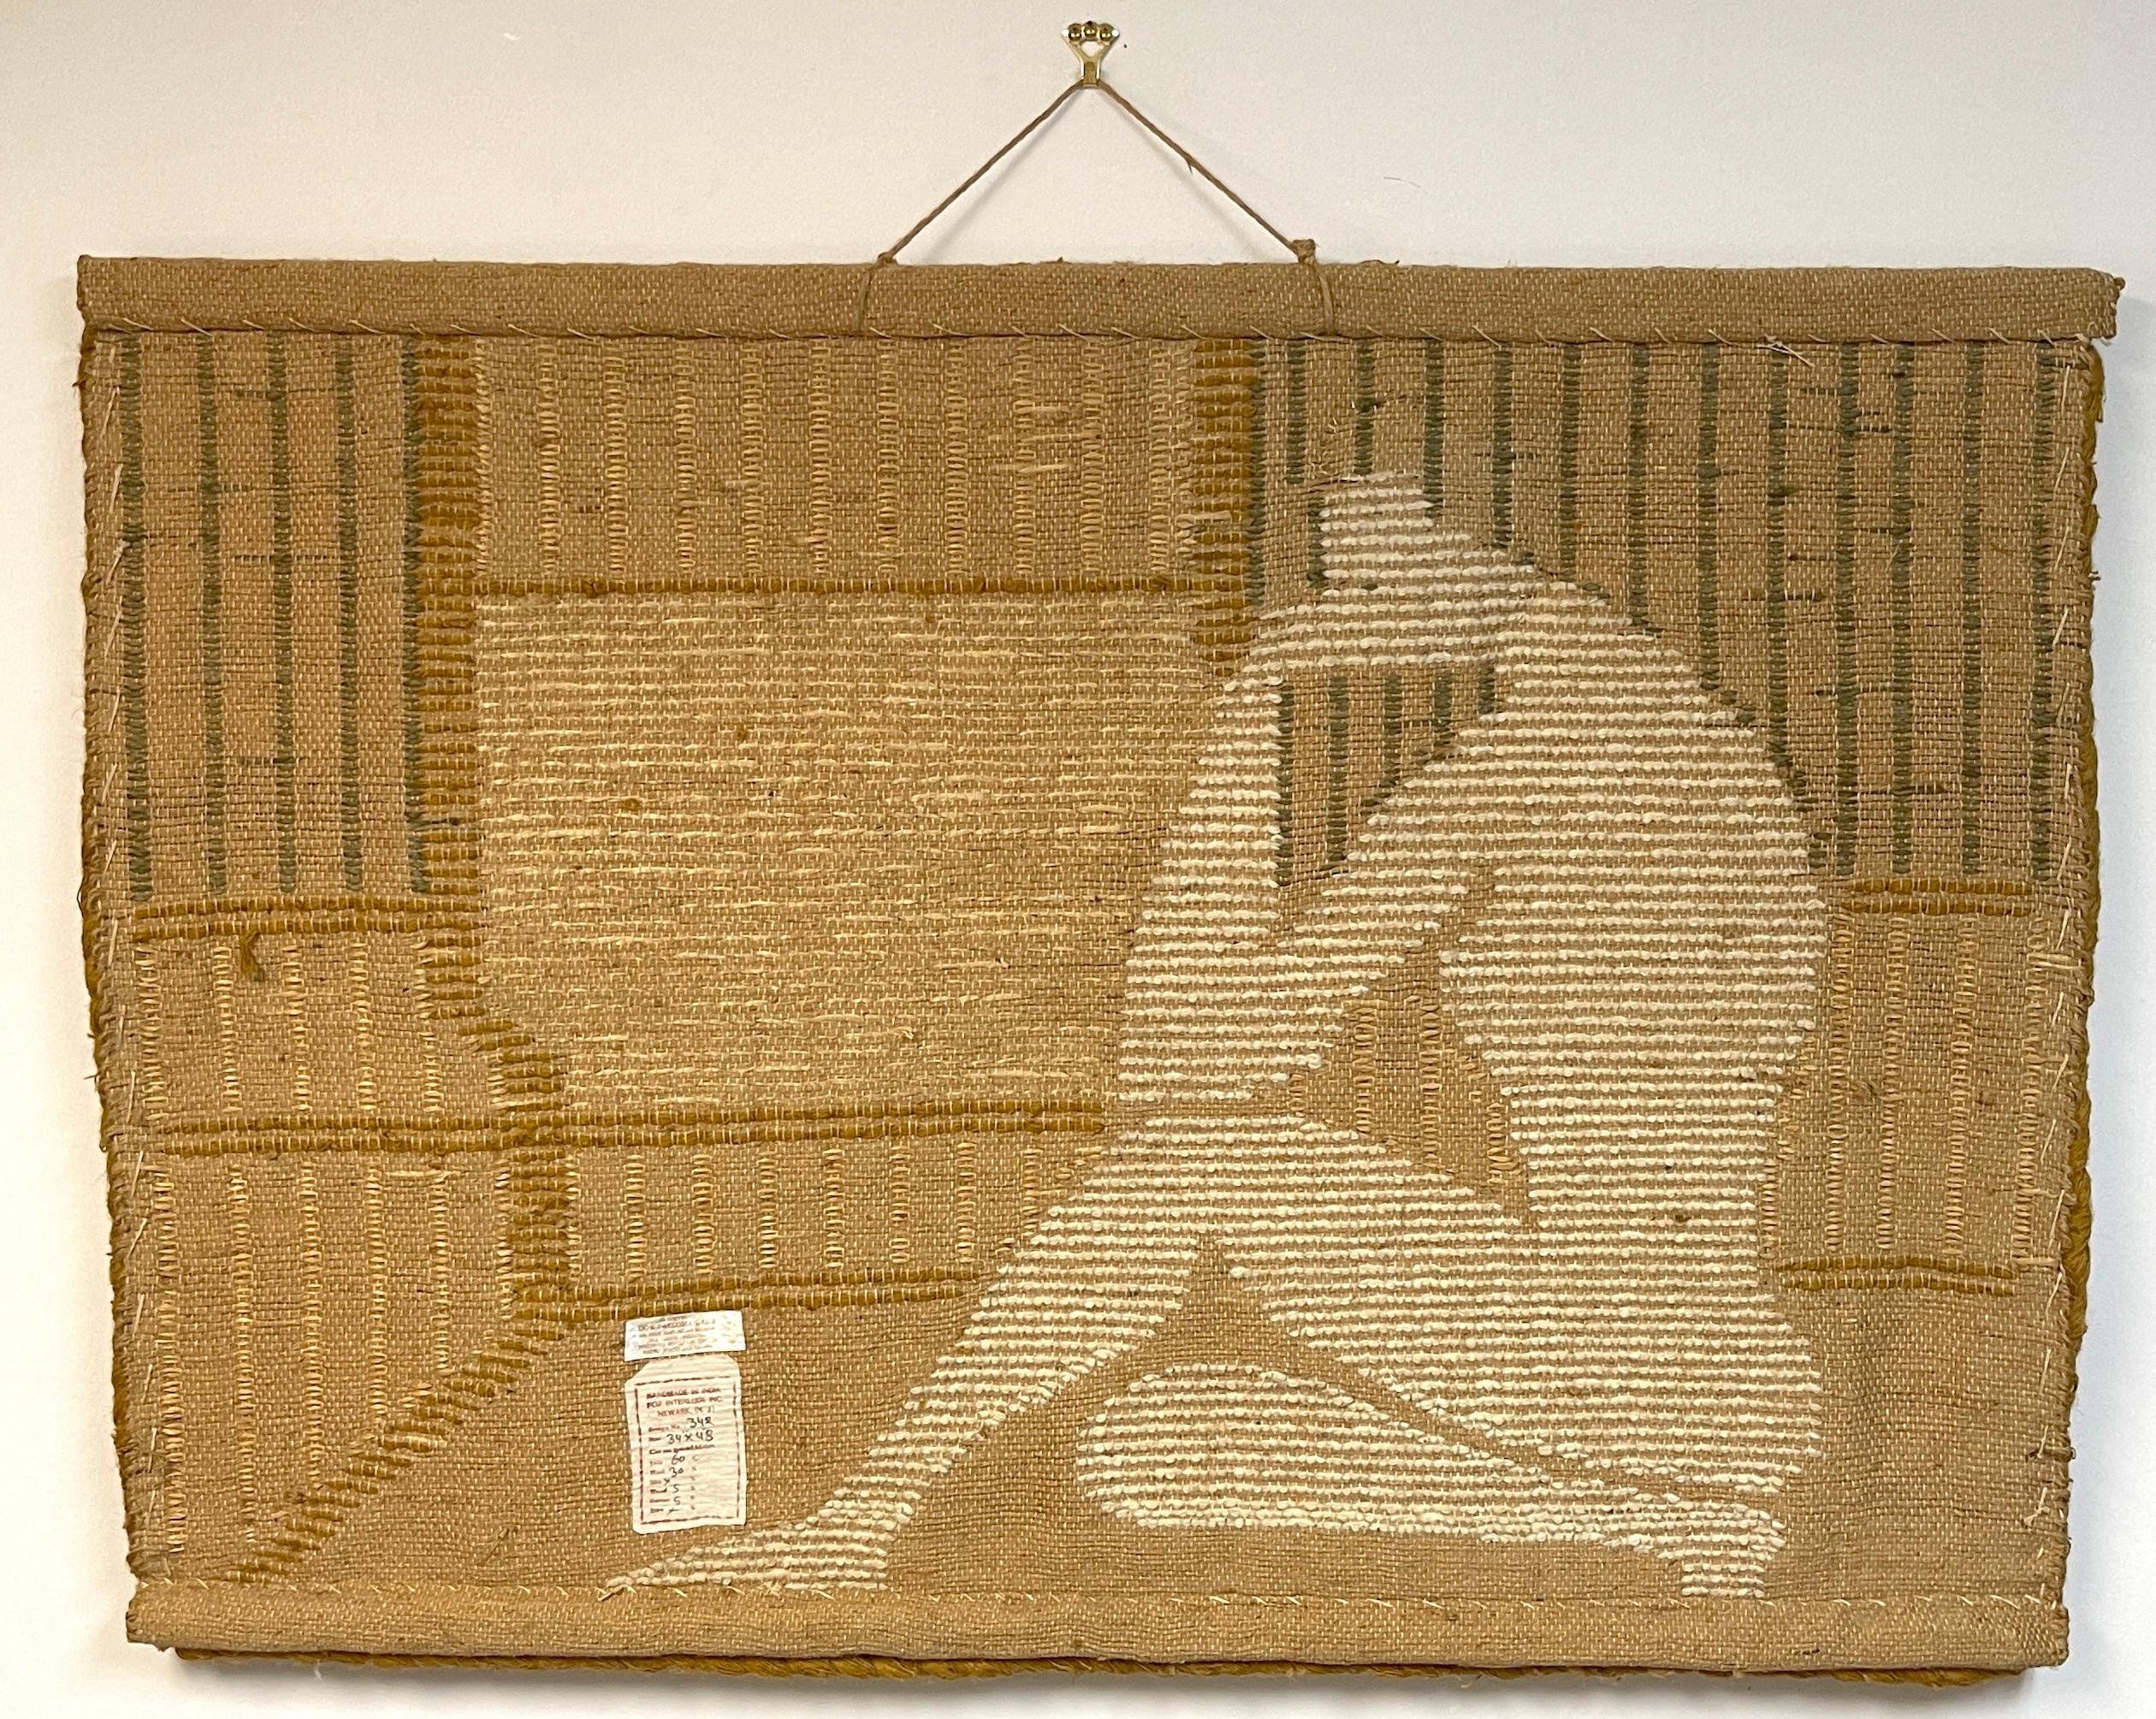 Wool Natural Fiber Art Wall Tapestry 'Seated Nude' by Don Freedman, 1978